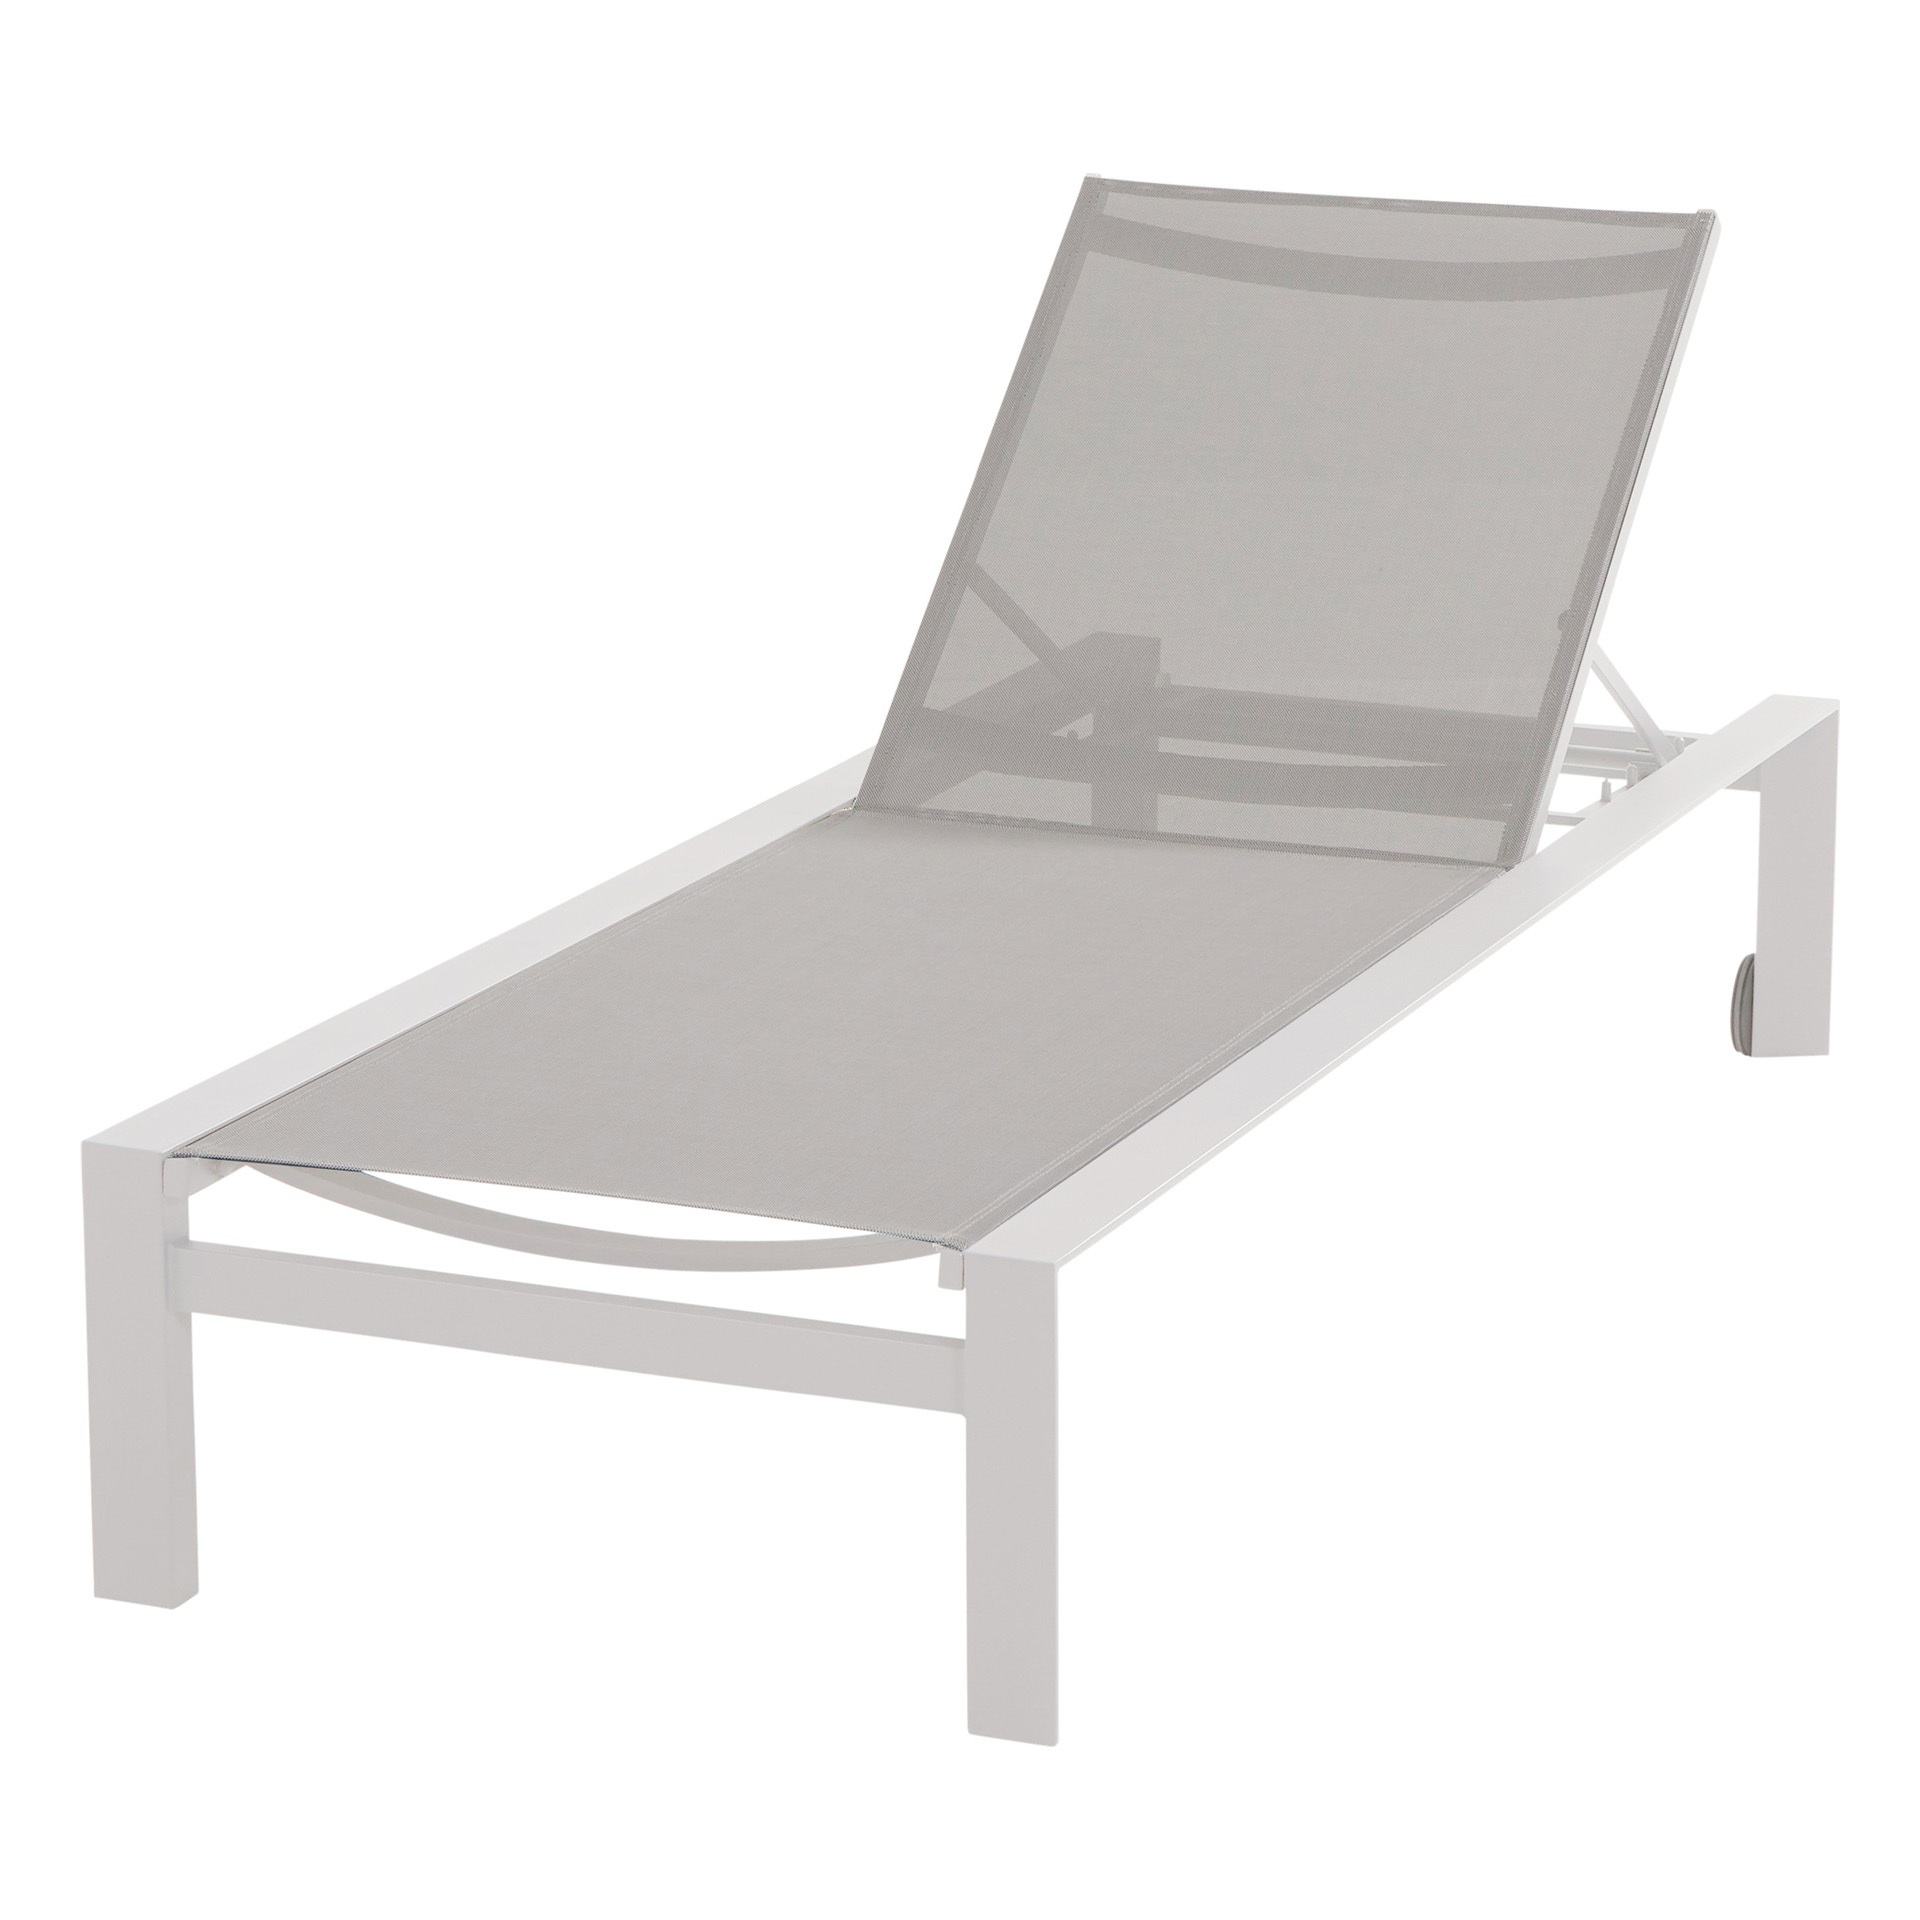 Tropic sunbed with wheel white 